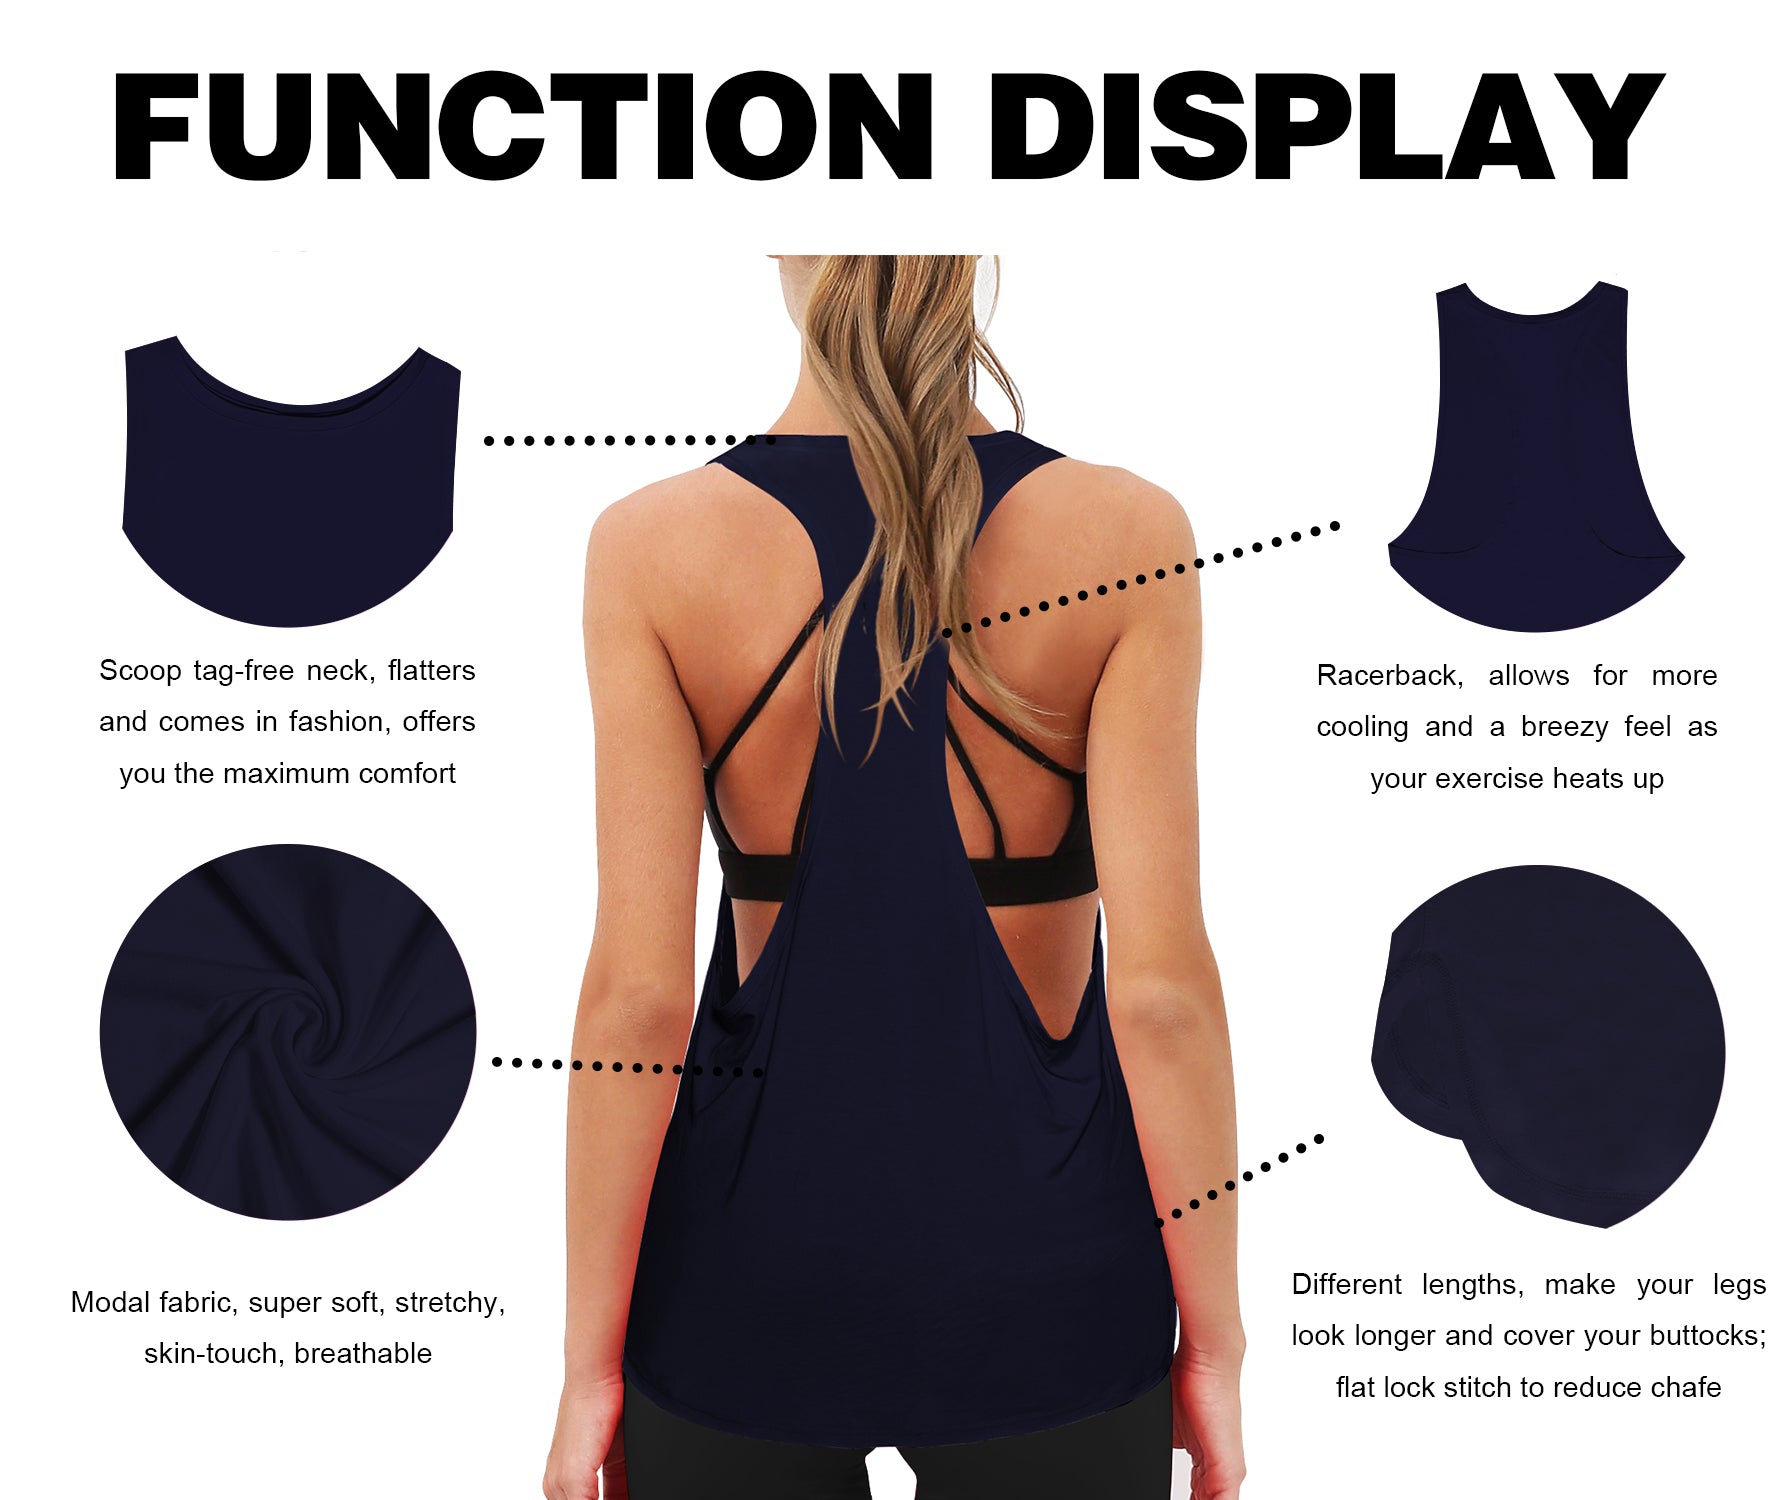 Low Cut Loose Fit Tank Top darknavy Designed for On the Move Loose fit 93%Modal/7%Spandex Four-way stretch Naturally breathable Super-Soft, Modal Fabric